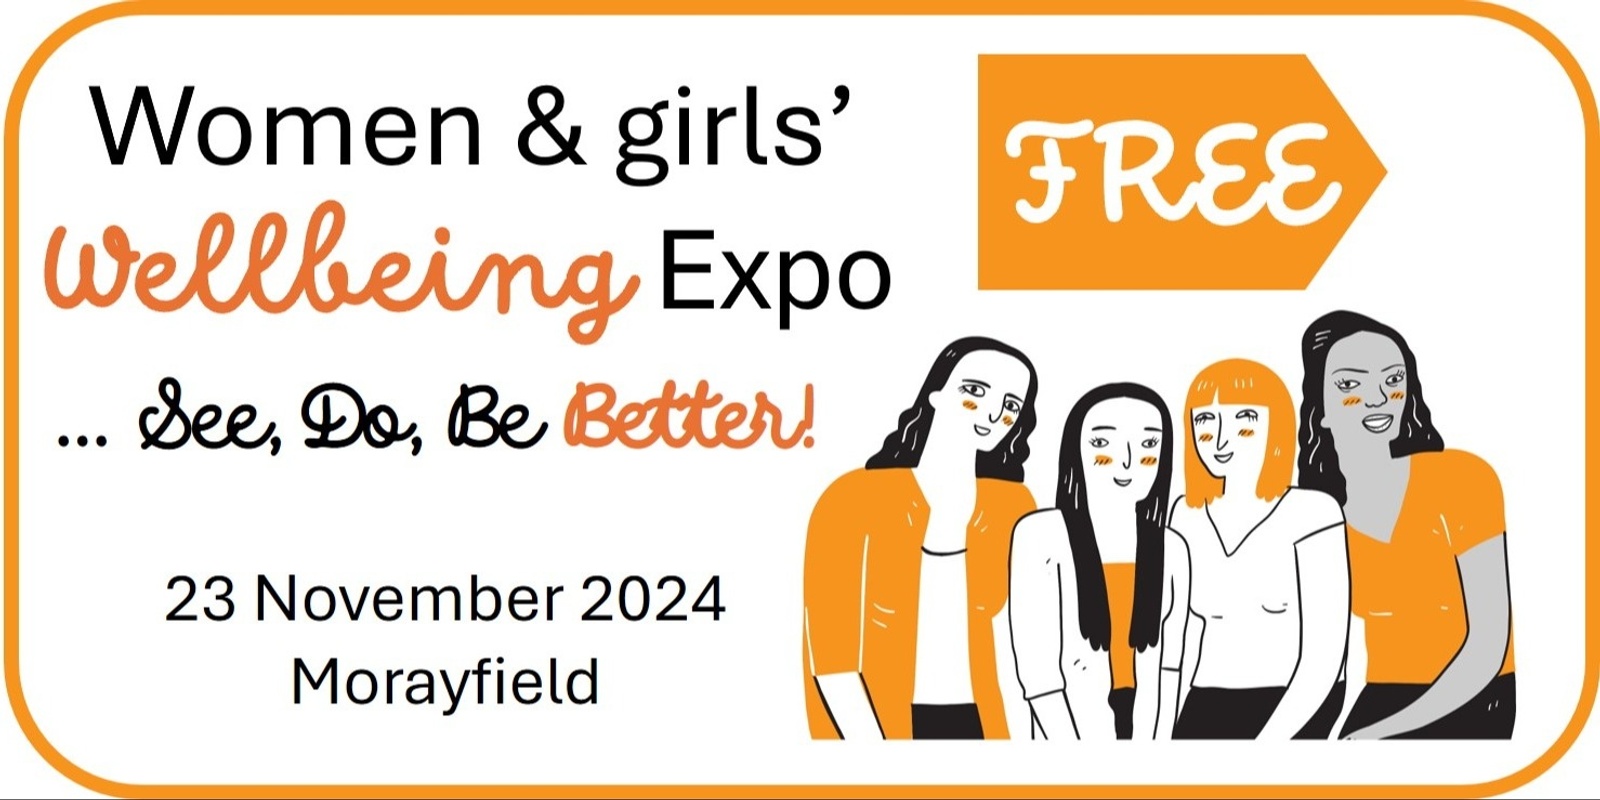 Banner image for Women and Girls' Wellbeing Expo ... See, Do, Be Better